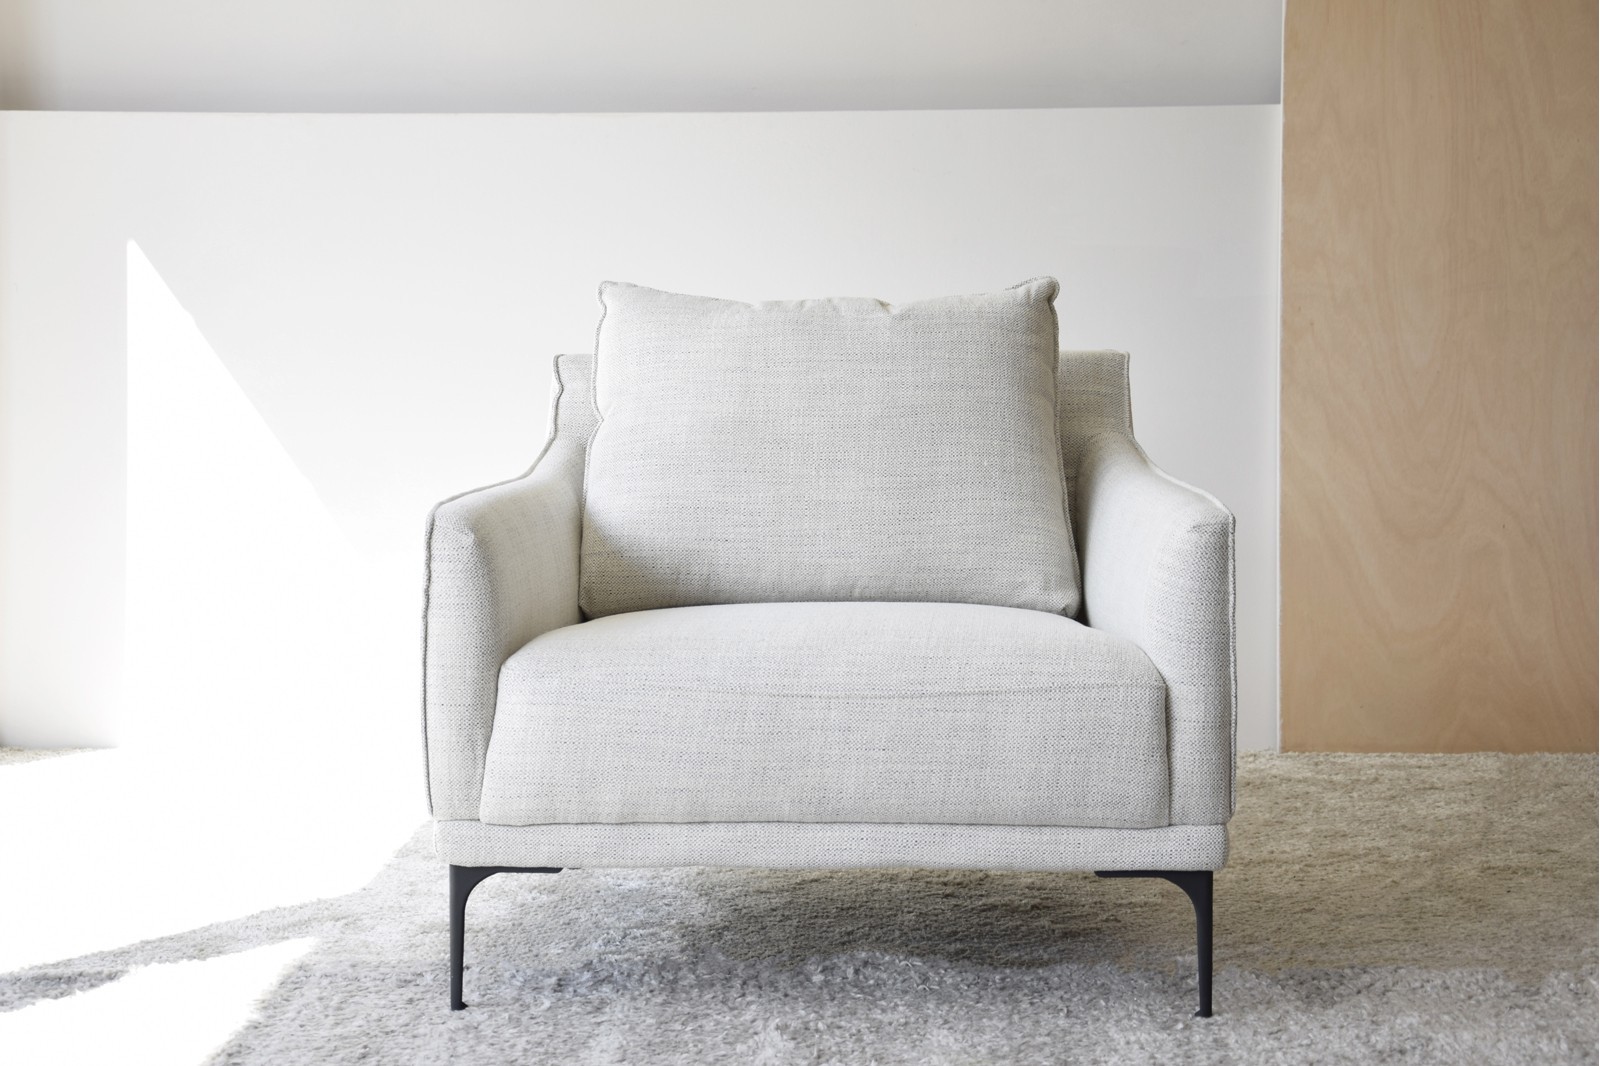 SQUARE ARMCHAIR. UPHOLSTERY IN BEIGE TONES